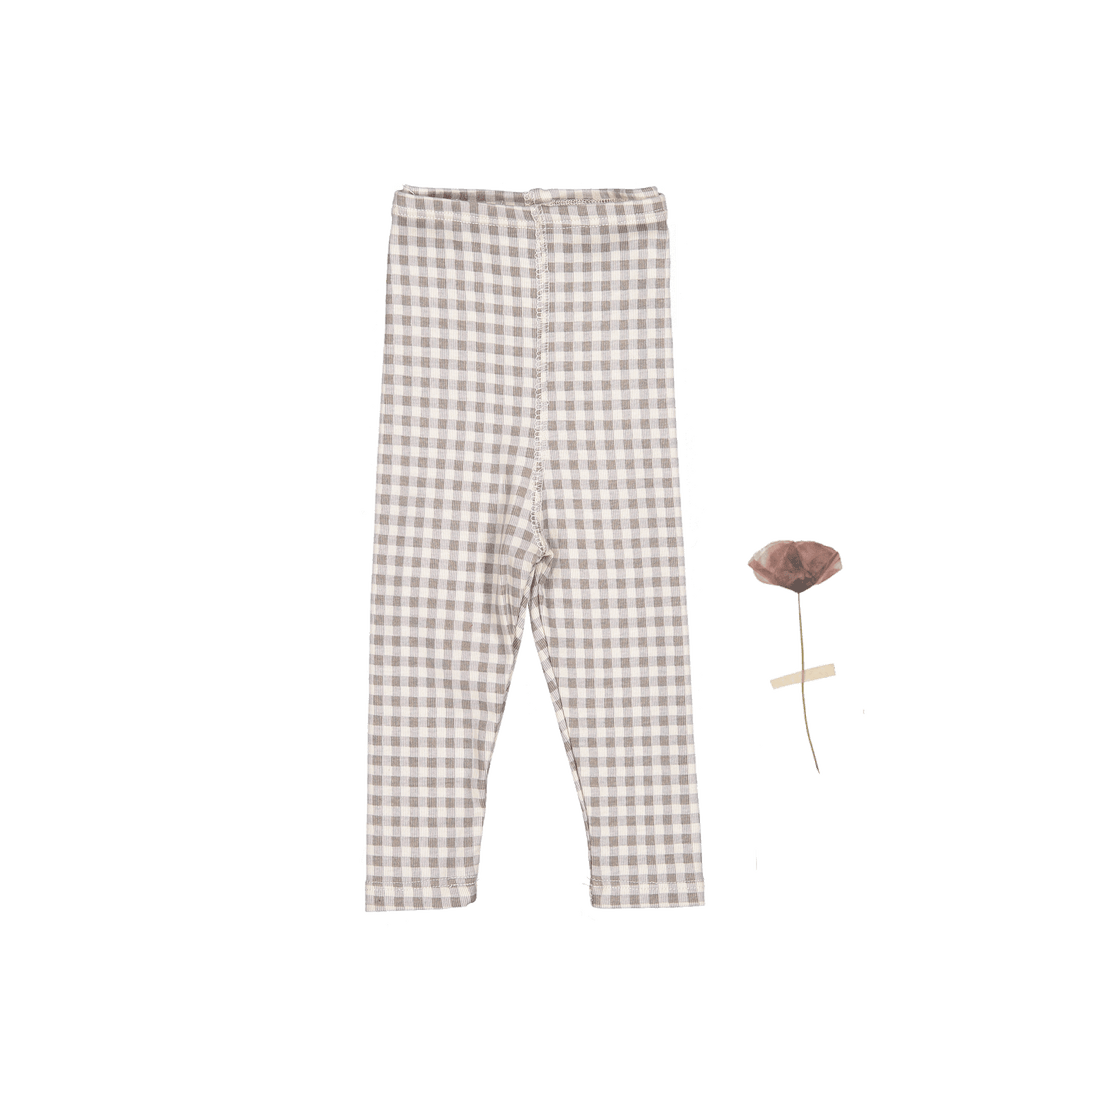 The Printed Legging - Taupe Gingham